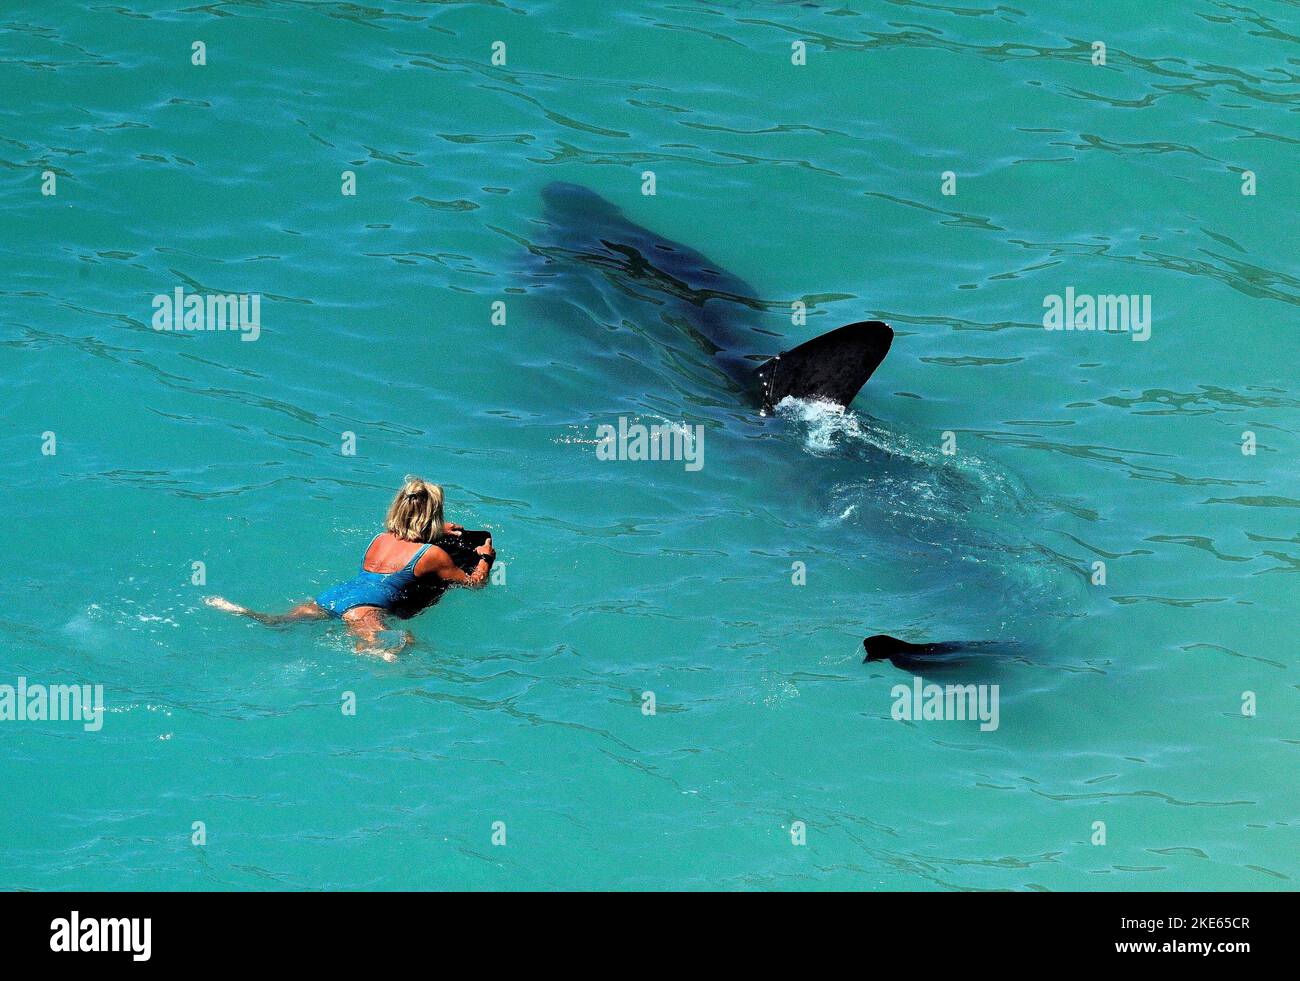 Massive Basking sharks chase female swimmers off the Cornish Coast at Porthcurnow  Beach Near Lands' End. Stock Photo